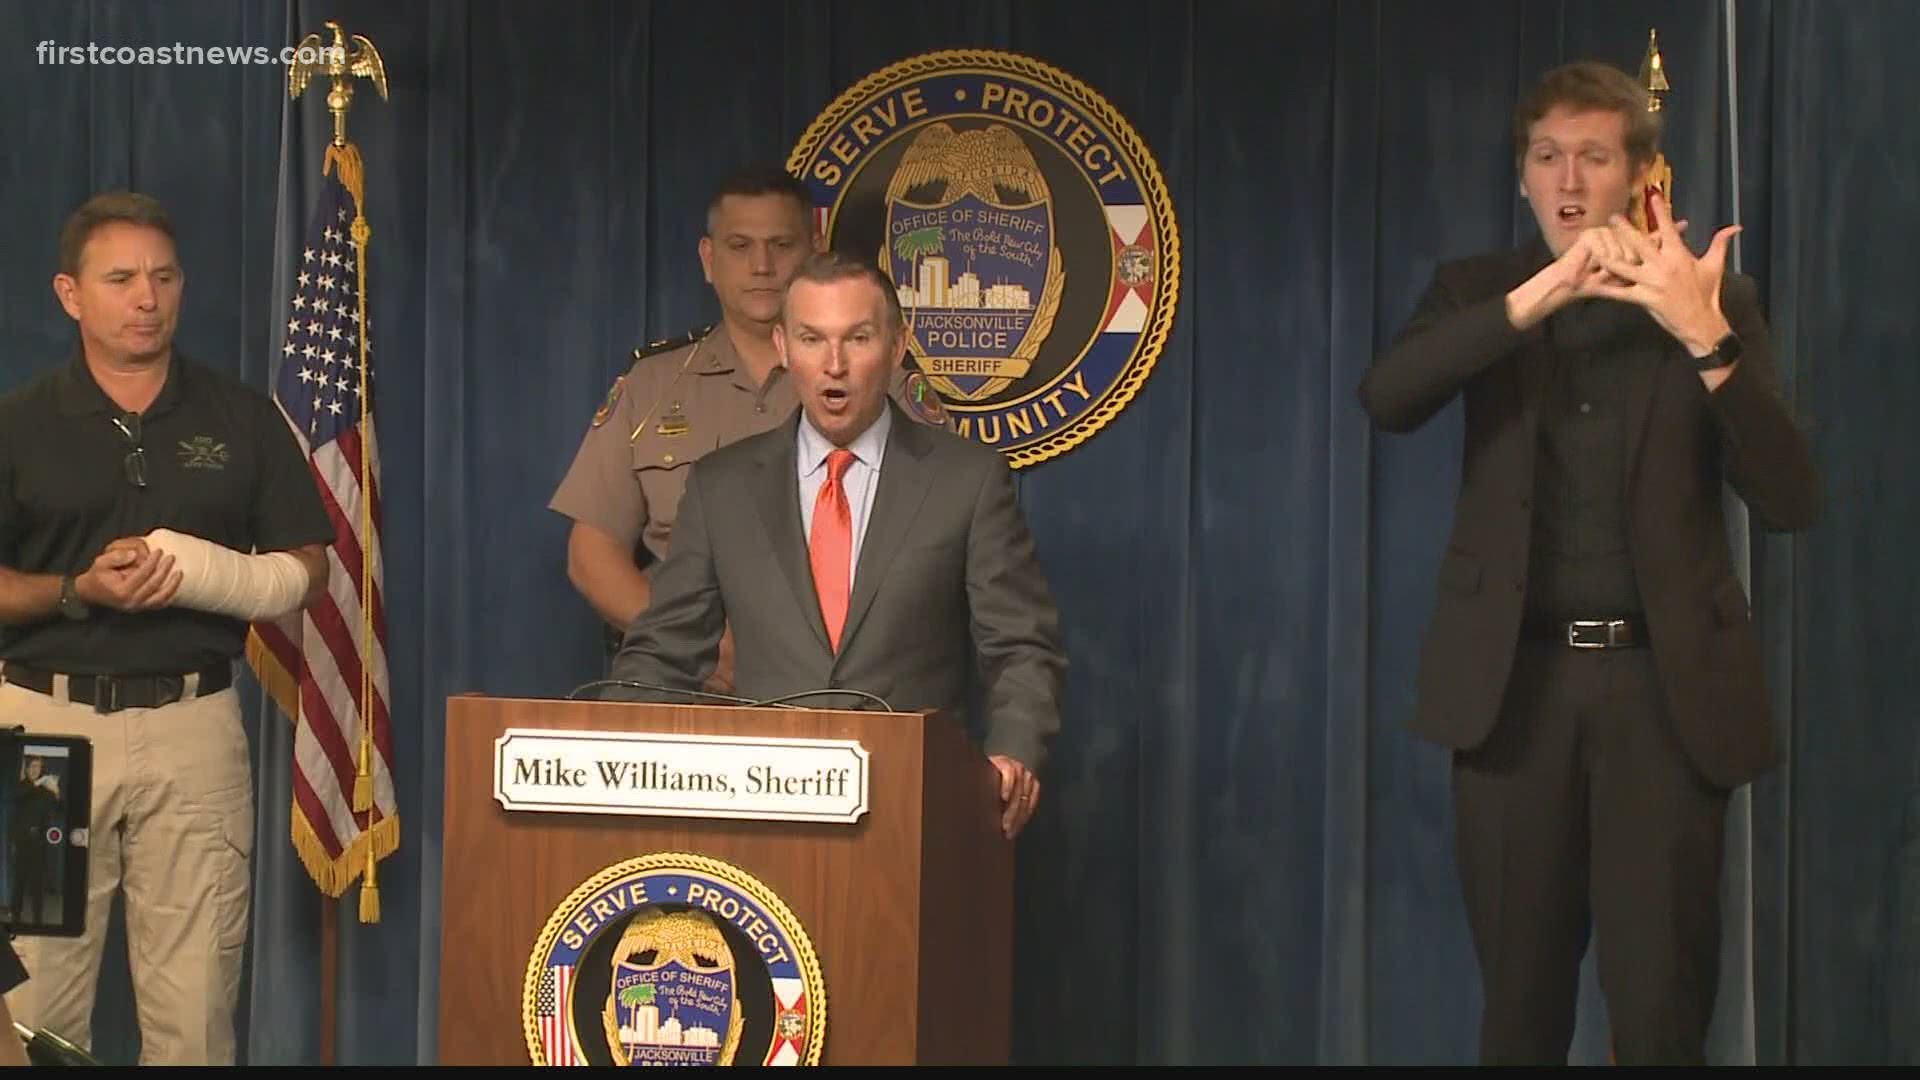 Both Jacksonville Mayor Lenny Curry and Sheriff Mike Williams held a news conference following a weekend of protests downtown.